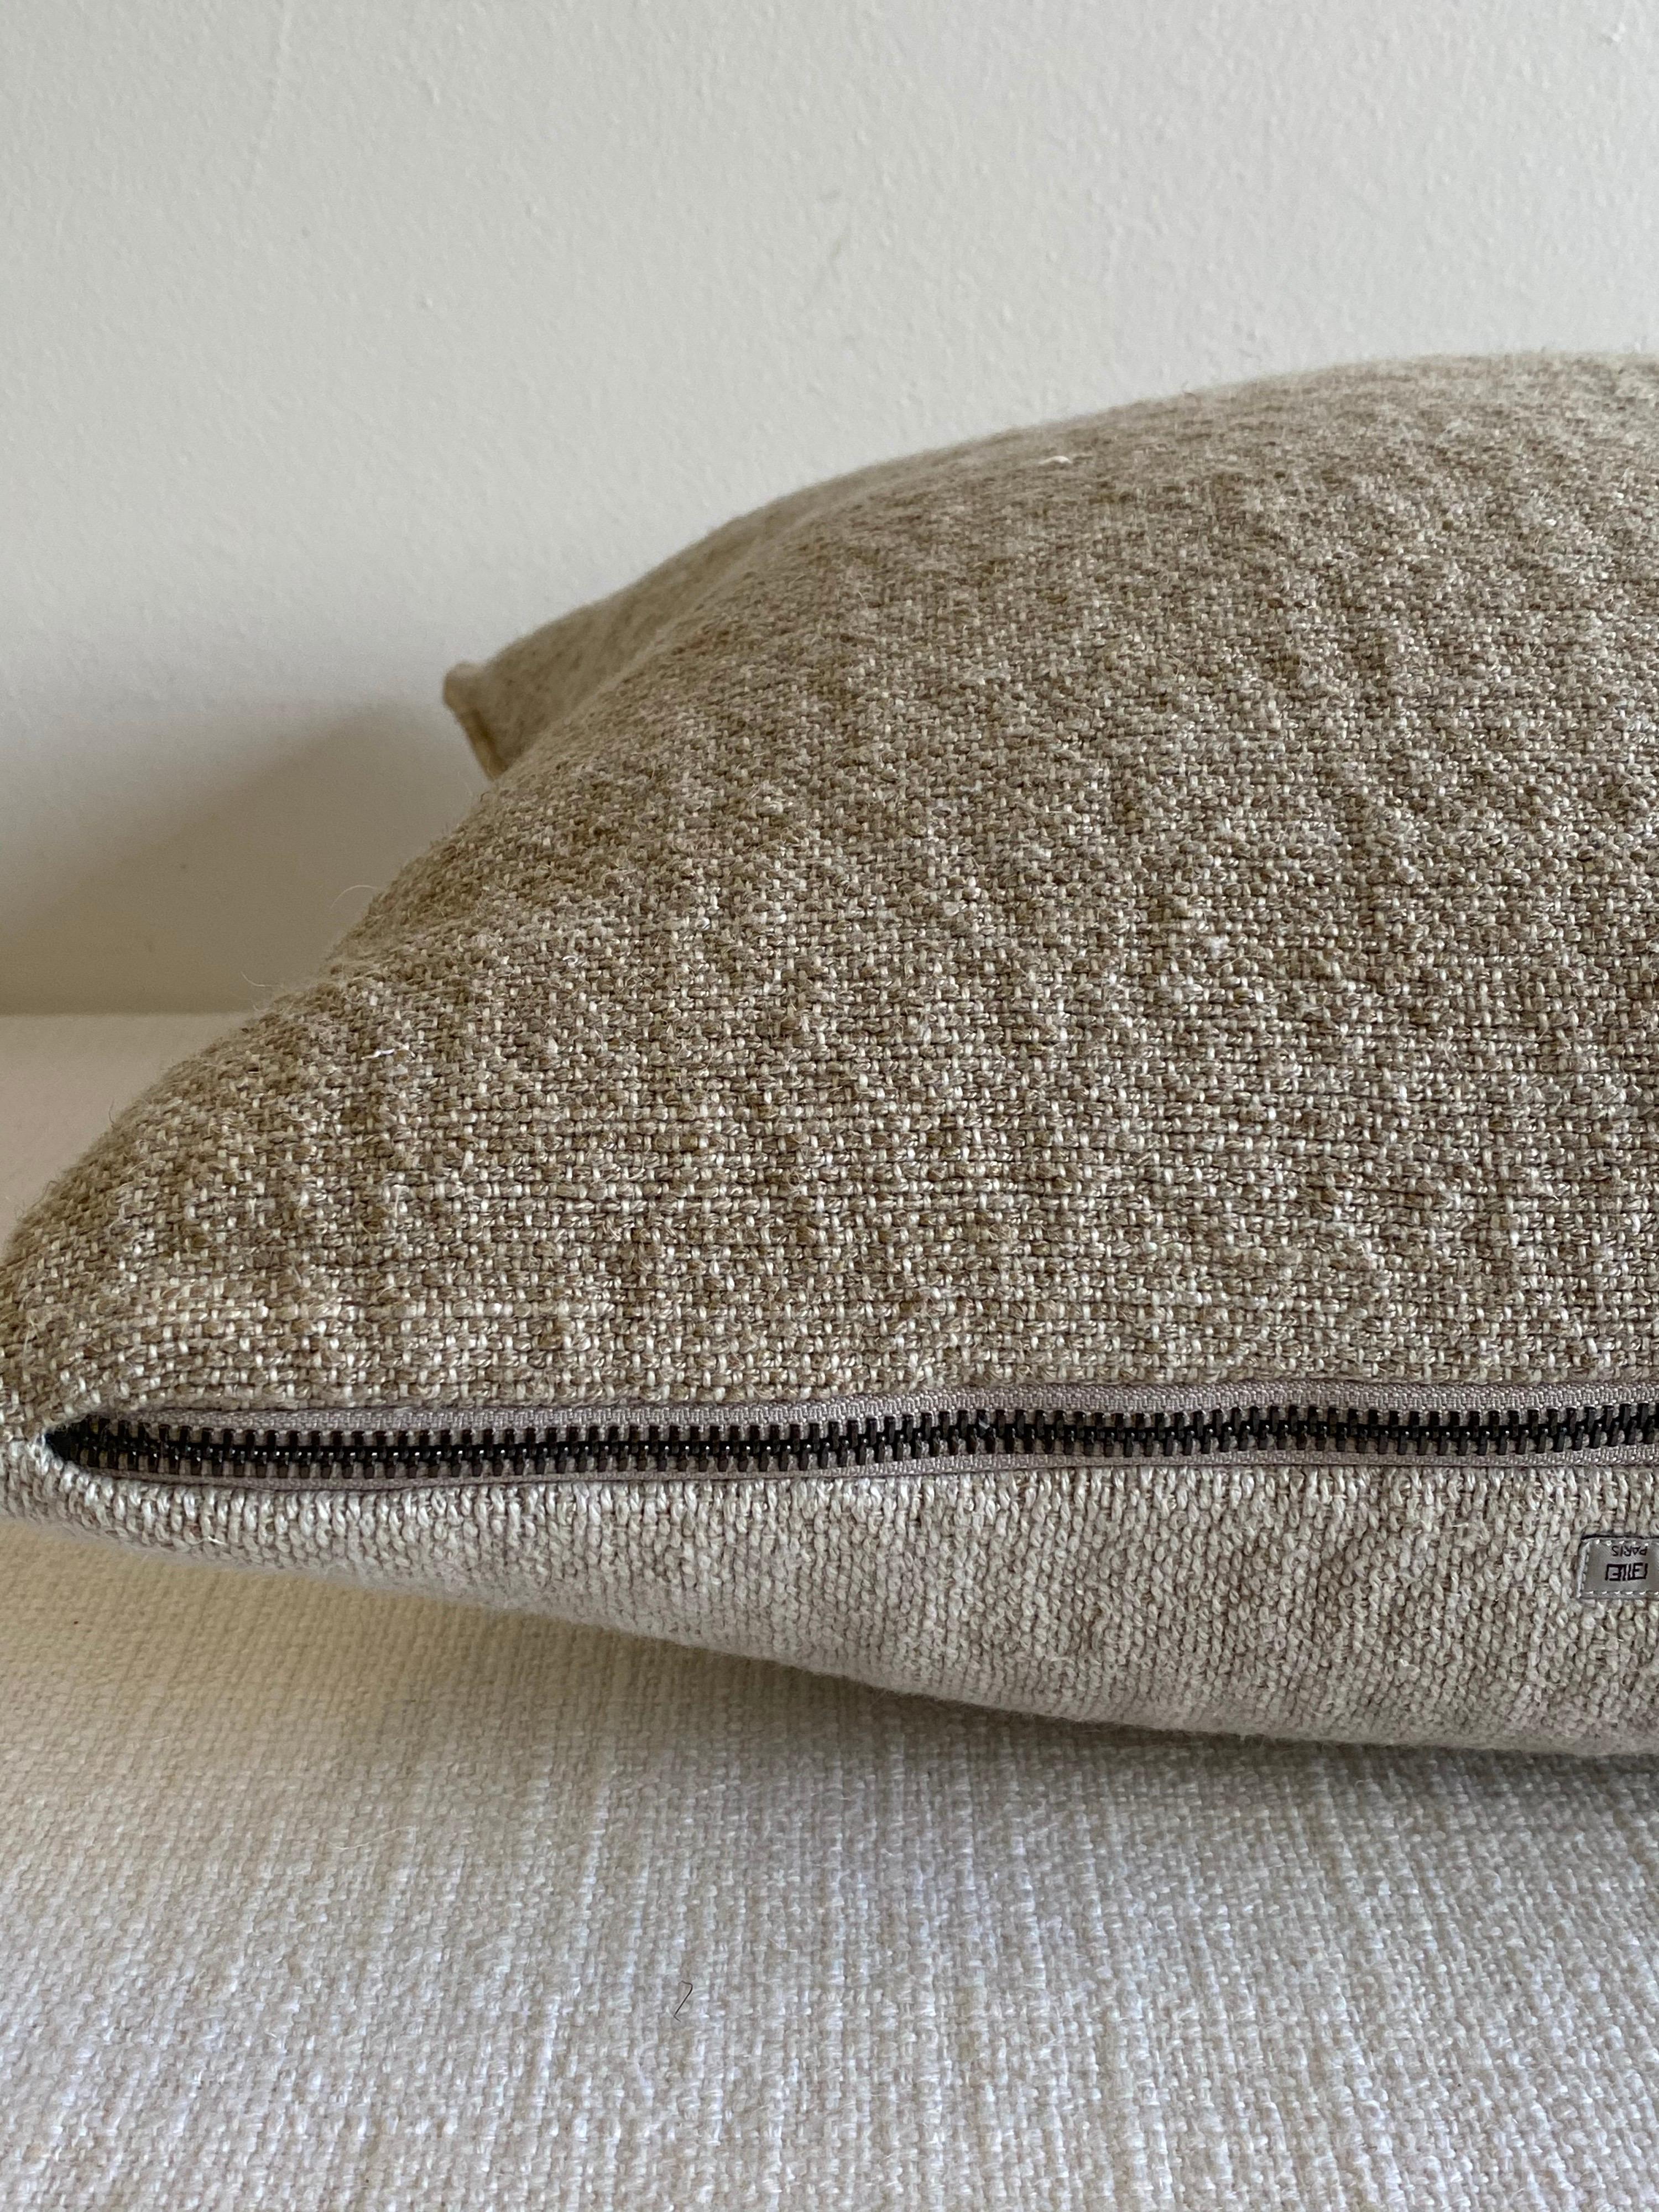 Nomade French Linen Accent Pillow In New Condition For Sale In Brea, CA